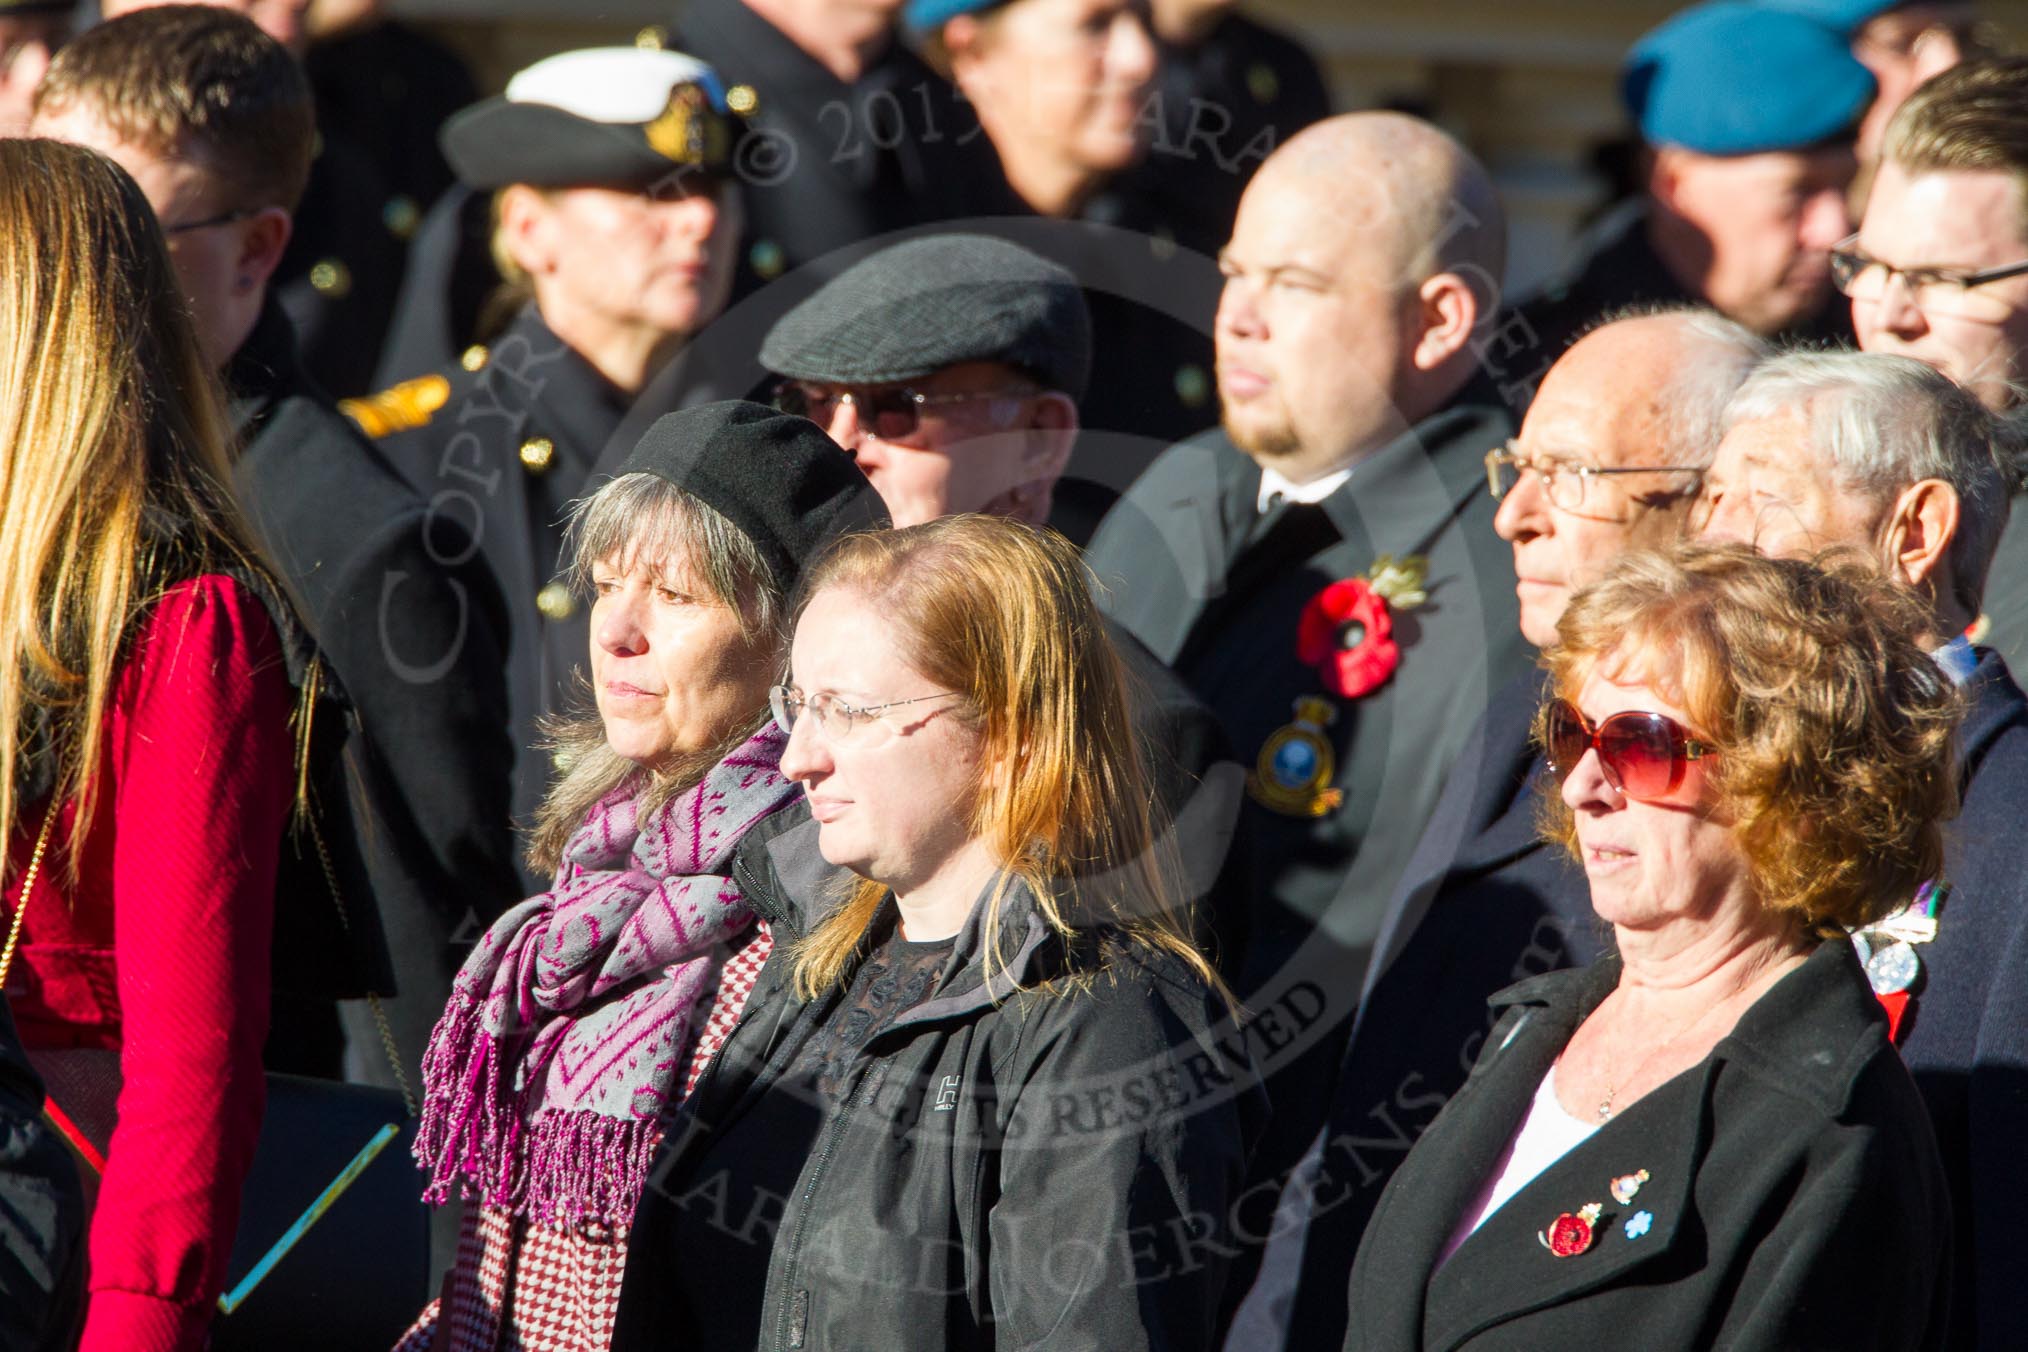 Remembrance Sunday Cenotaph March Past 2013: D27 - British Nuclear Test Veterans Association..
Press stand opposite the Foreign Office building, Whitehall, London SW1,
London,
Greater London,
United Kingdom,
on 10 November 2013 at 11:41, image #220